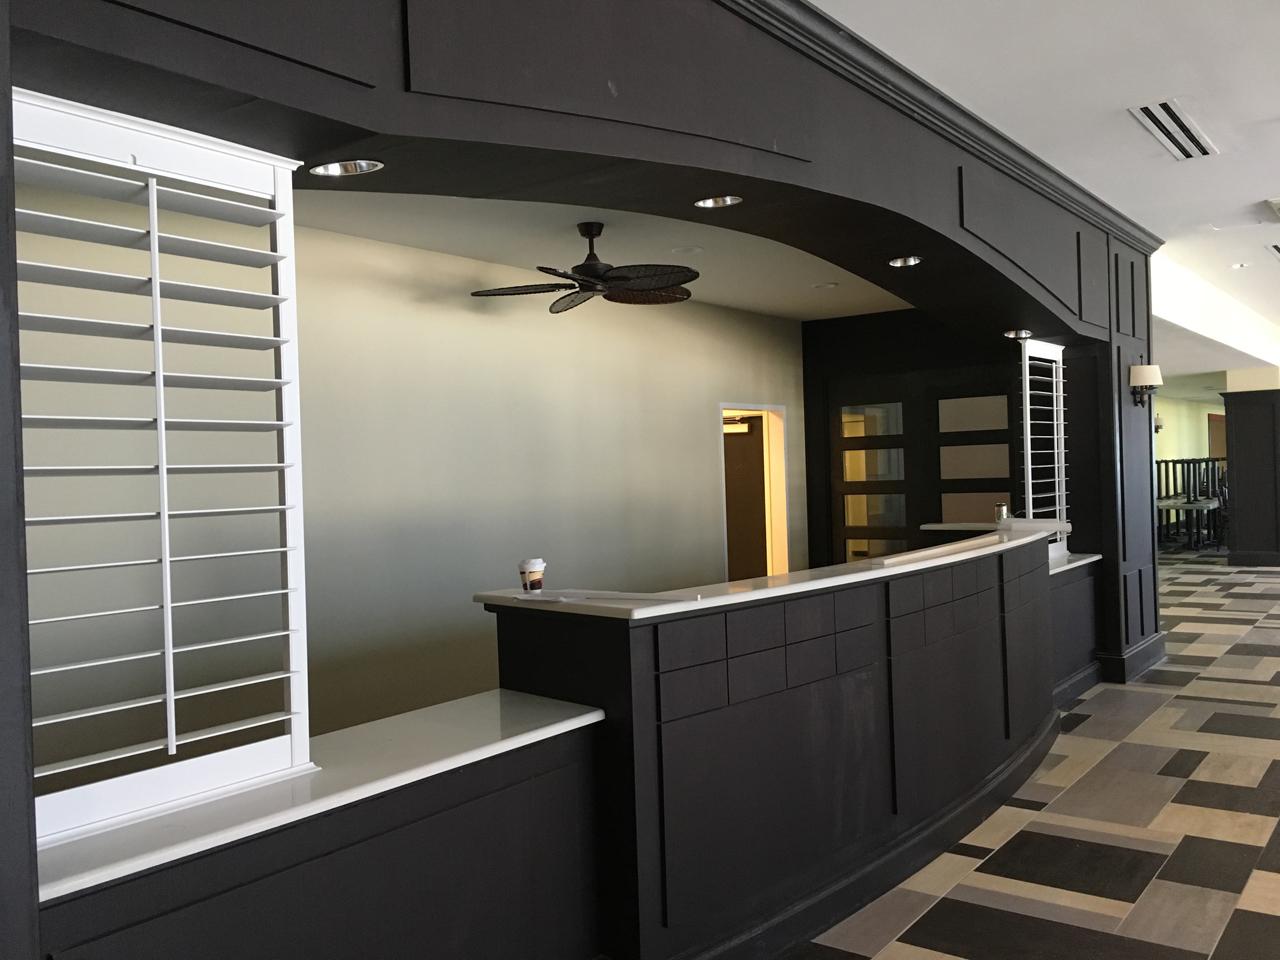 Hotel front desk with louvered shutters